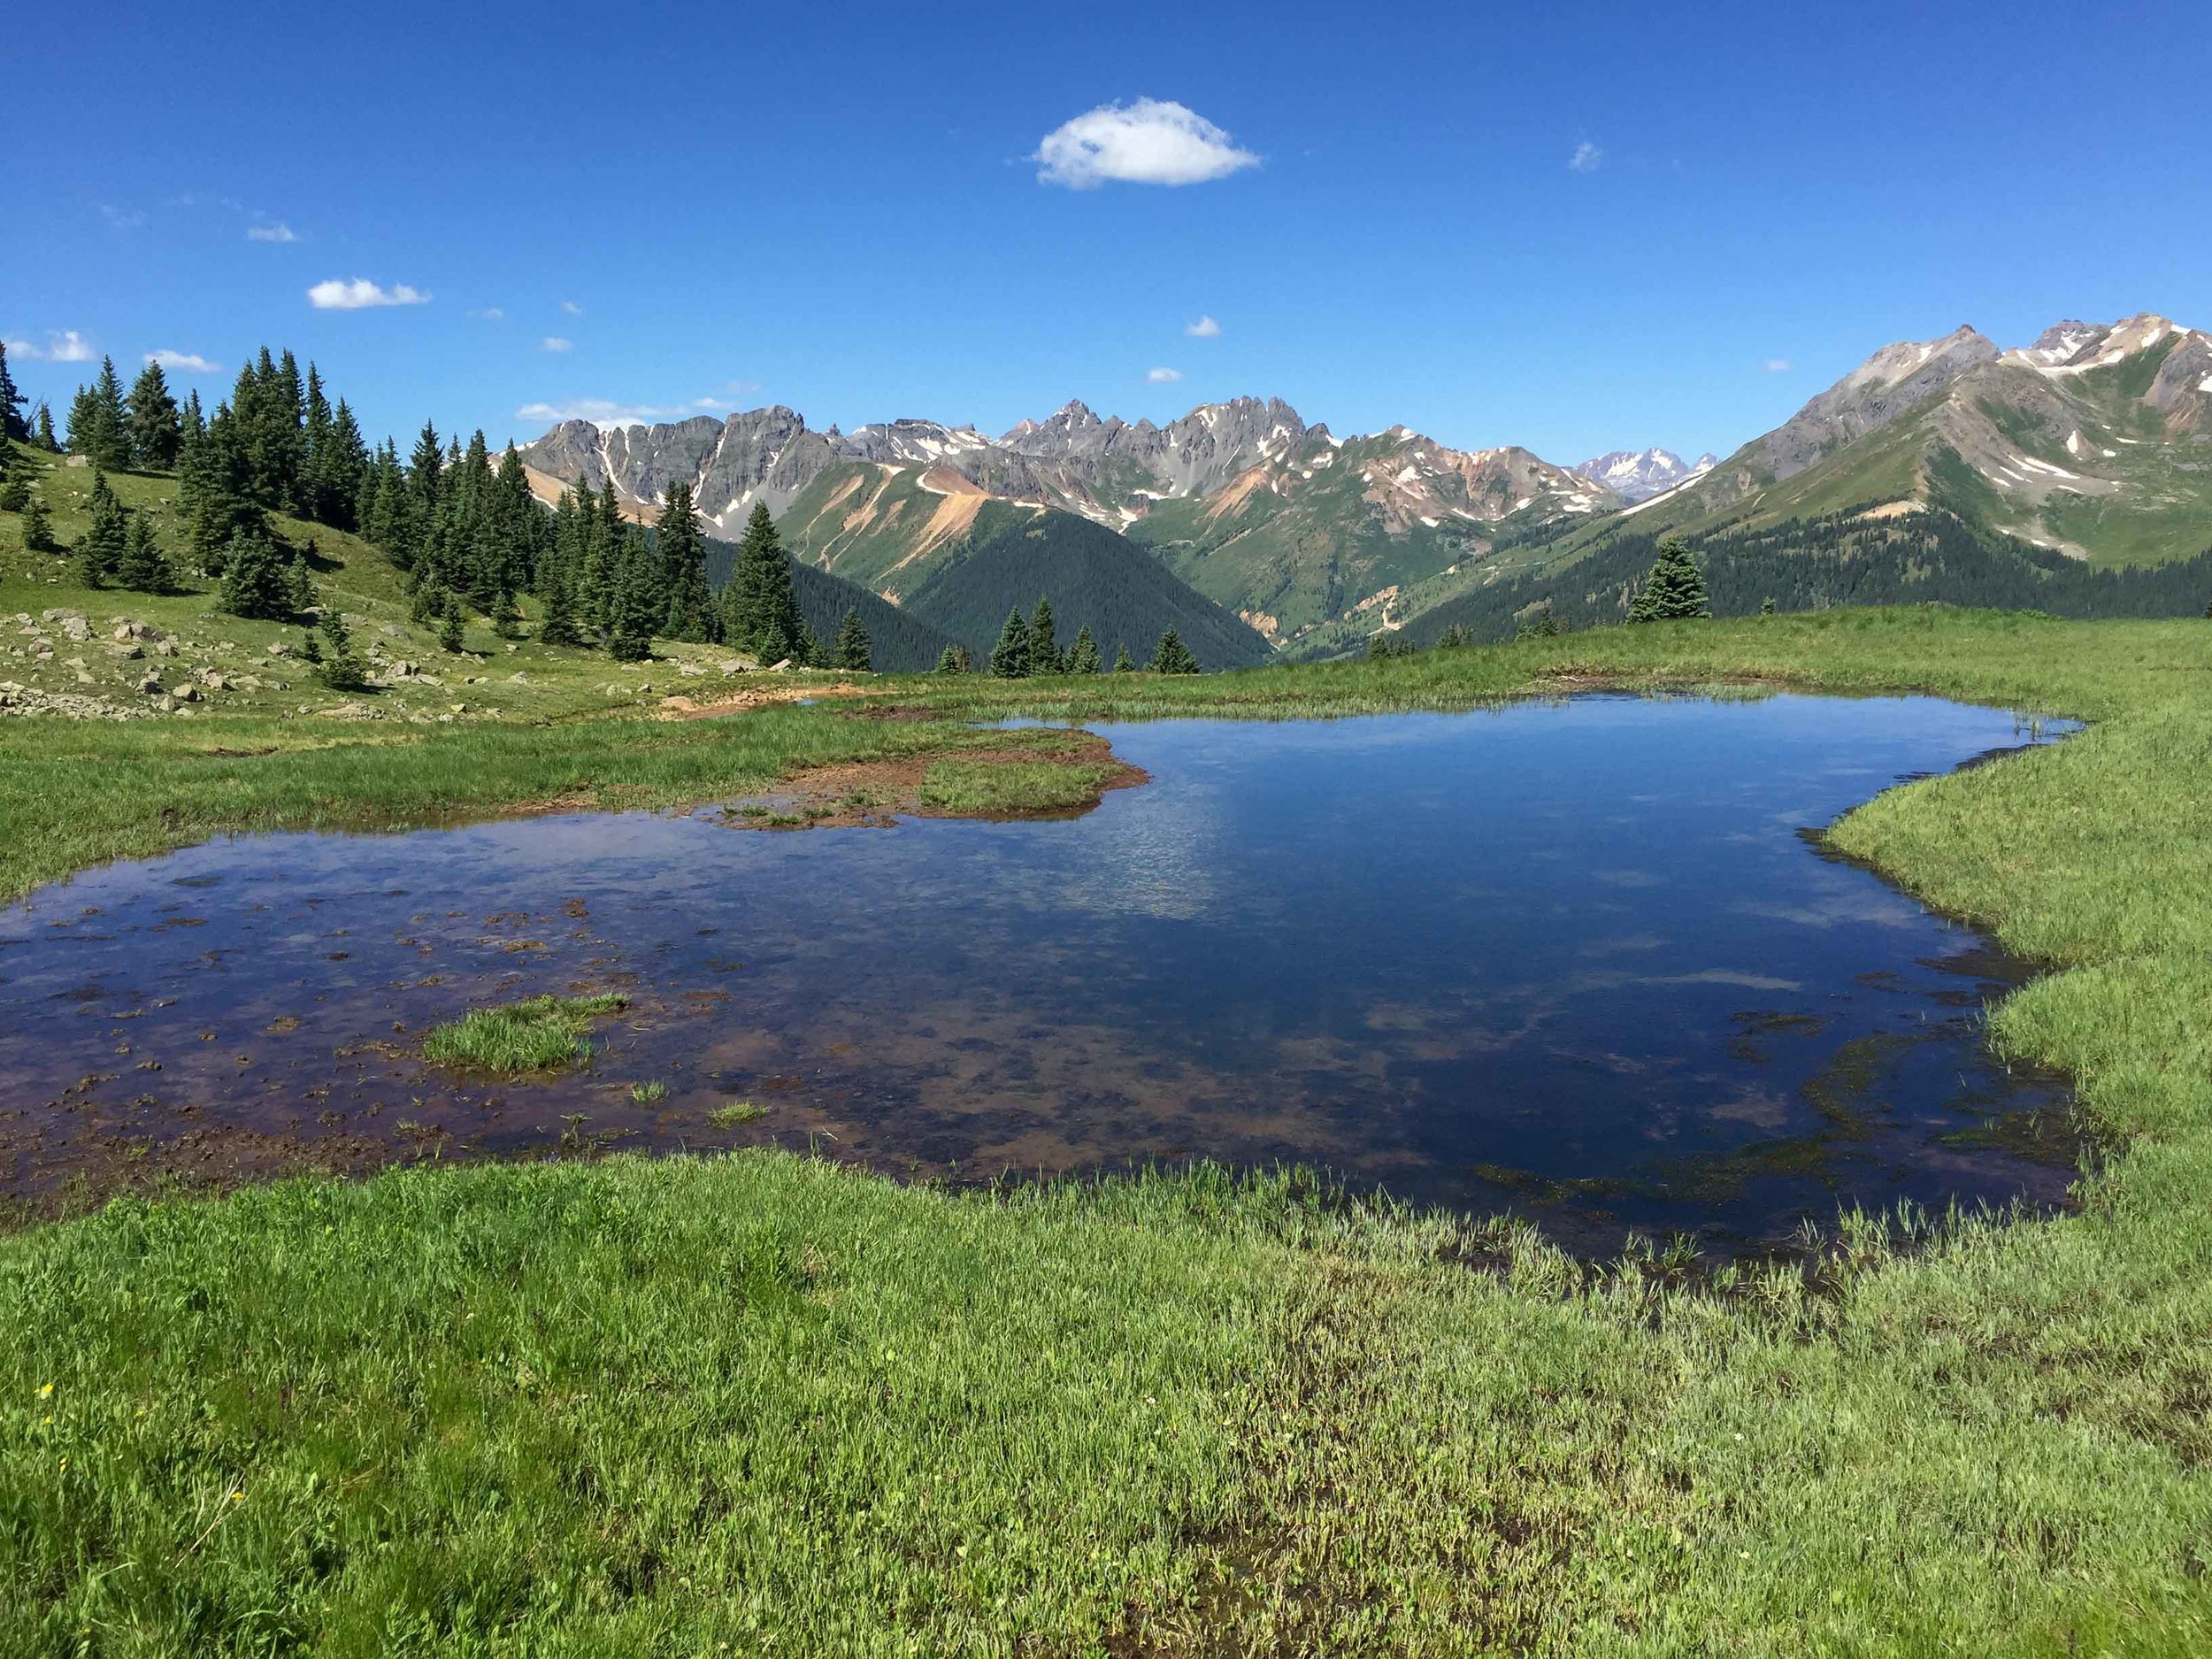 Another pond with a view of the San Juan Mountains